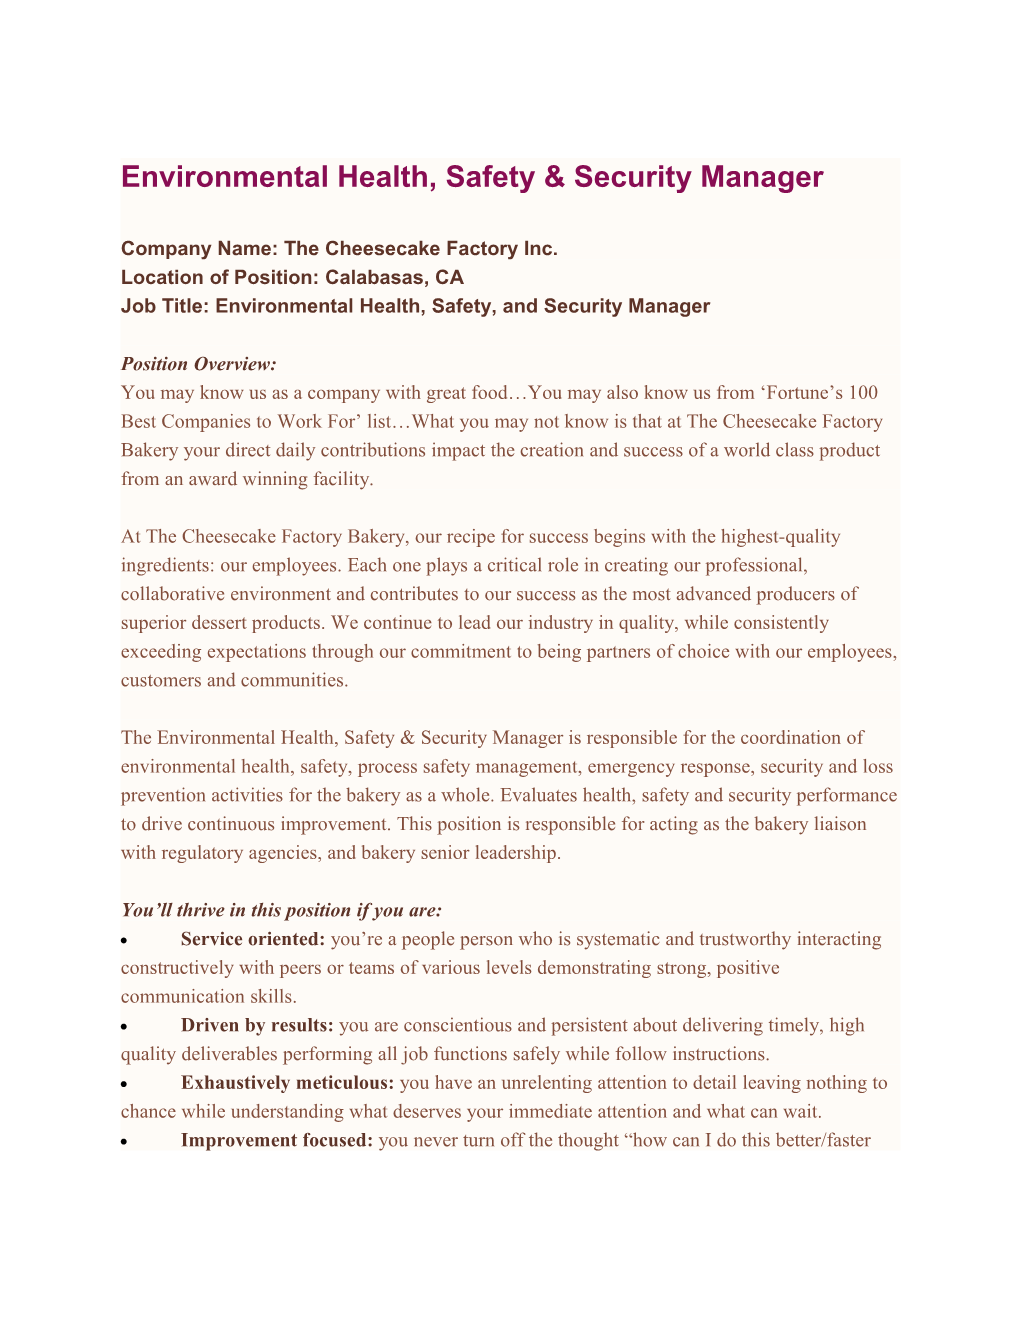 Environmental Health, Safety & Security Manager